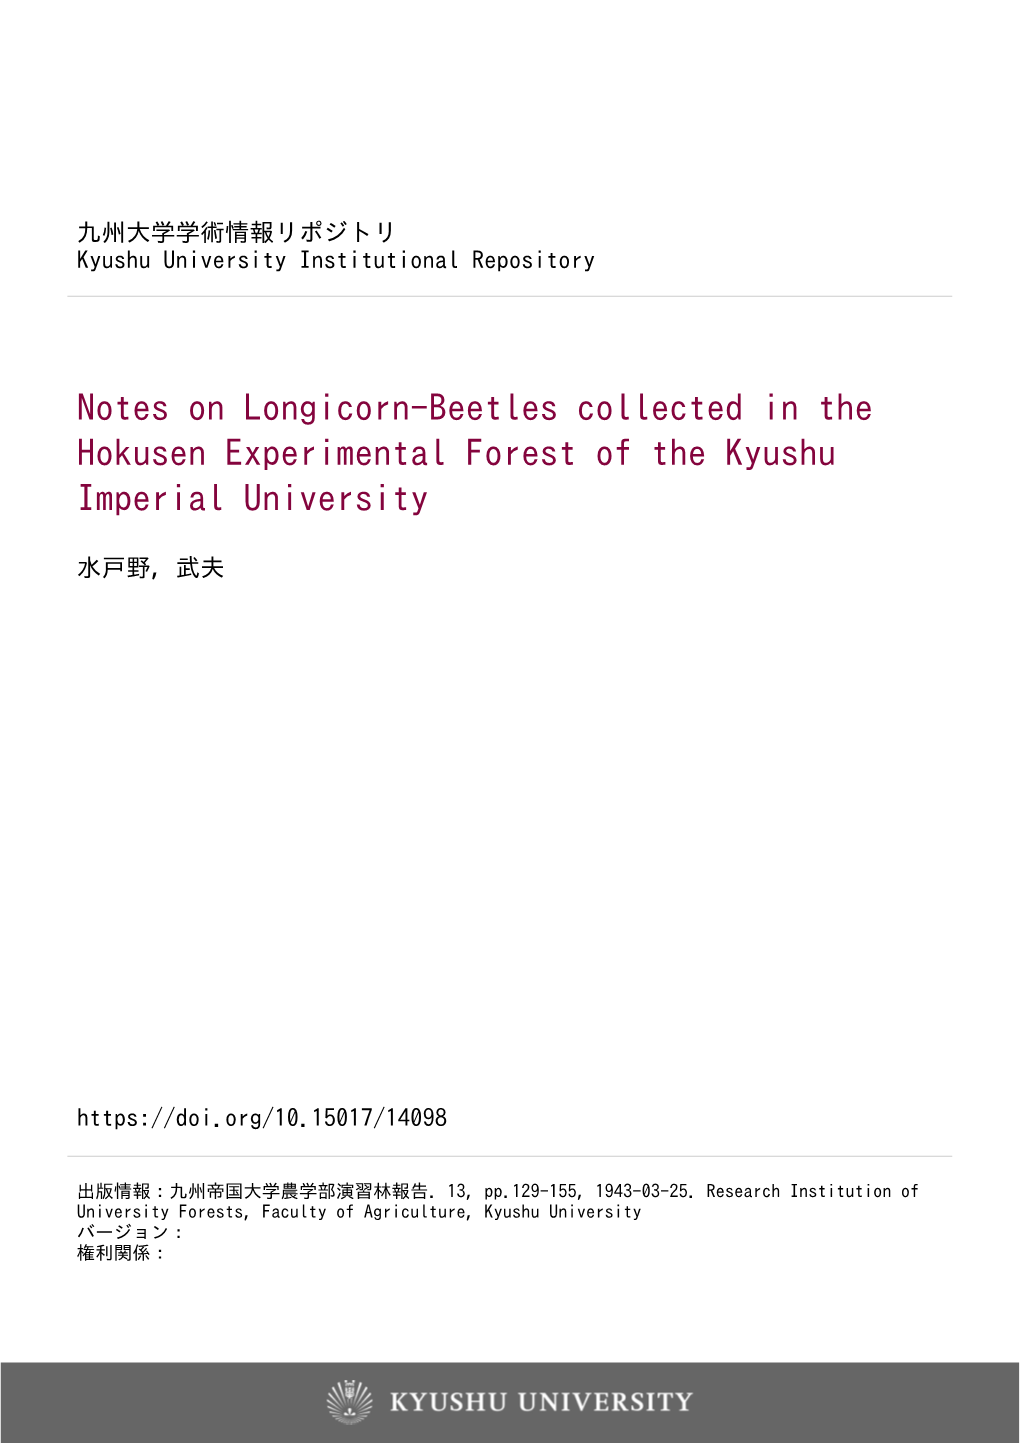 Notes on Longicorn-Beetles Collected in the Hokusen Experimental Forest of the Kyushu Imperial University